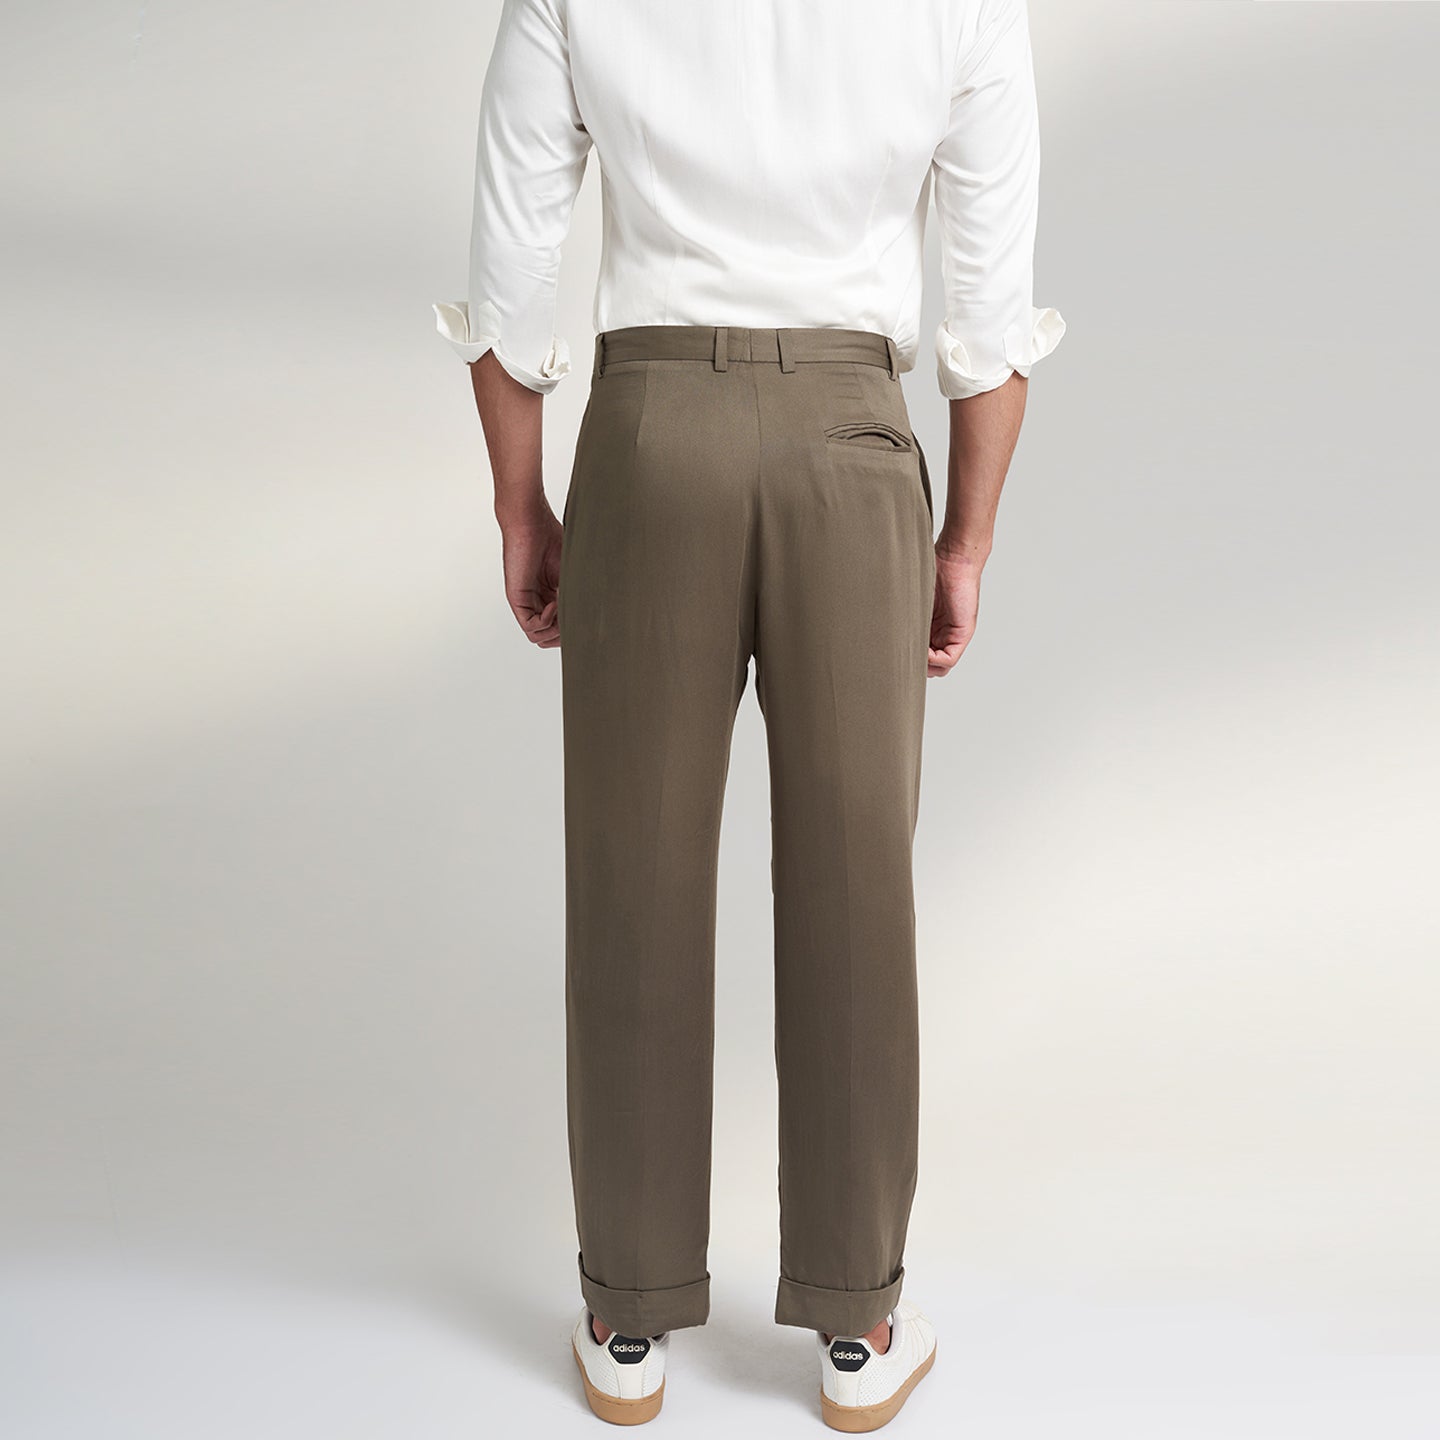 Lotus Stem fabric trousers, inspired by the timeless elegance of our Antique Reminiscence Collection. These trousers feature a comfortable fit, adorned with two front pleats and a stylish turn-up bottom and a back pocket. The super-soft fabric ensures a luxurious feel, making them an ideal choice for your leisurewear wardrobe.